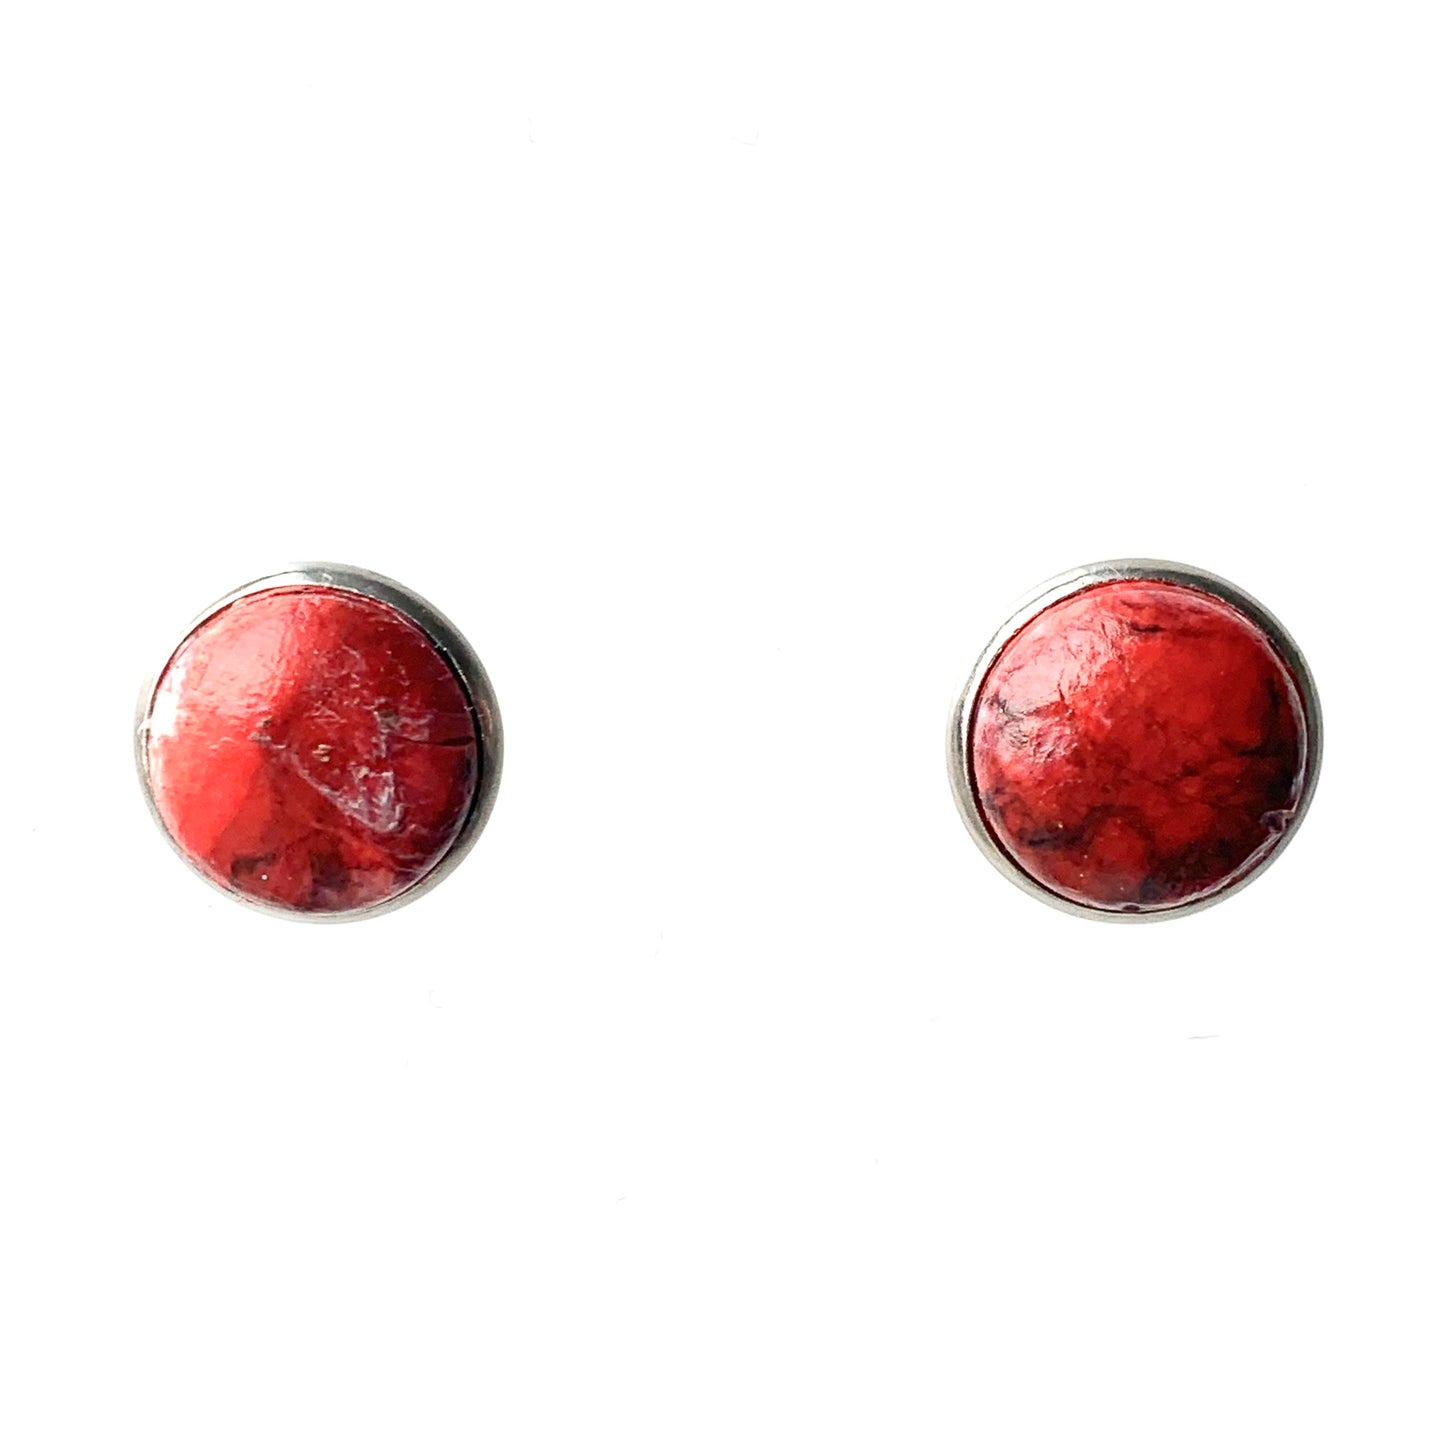 12mm Round red studs made from recycled plastic